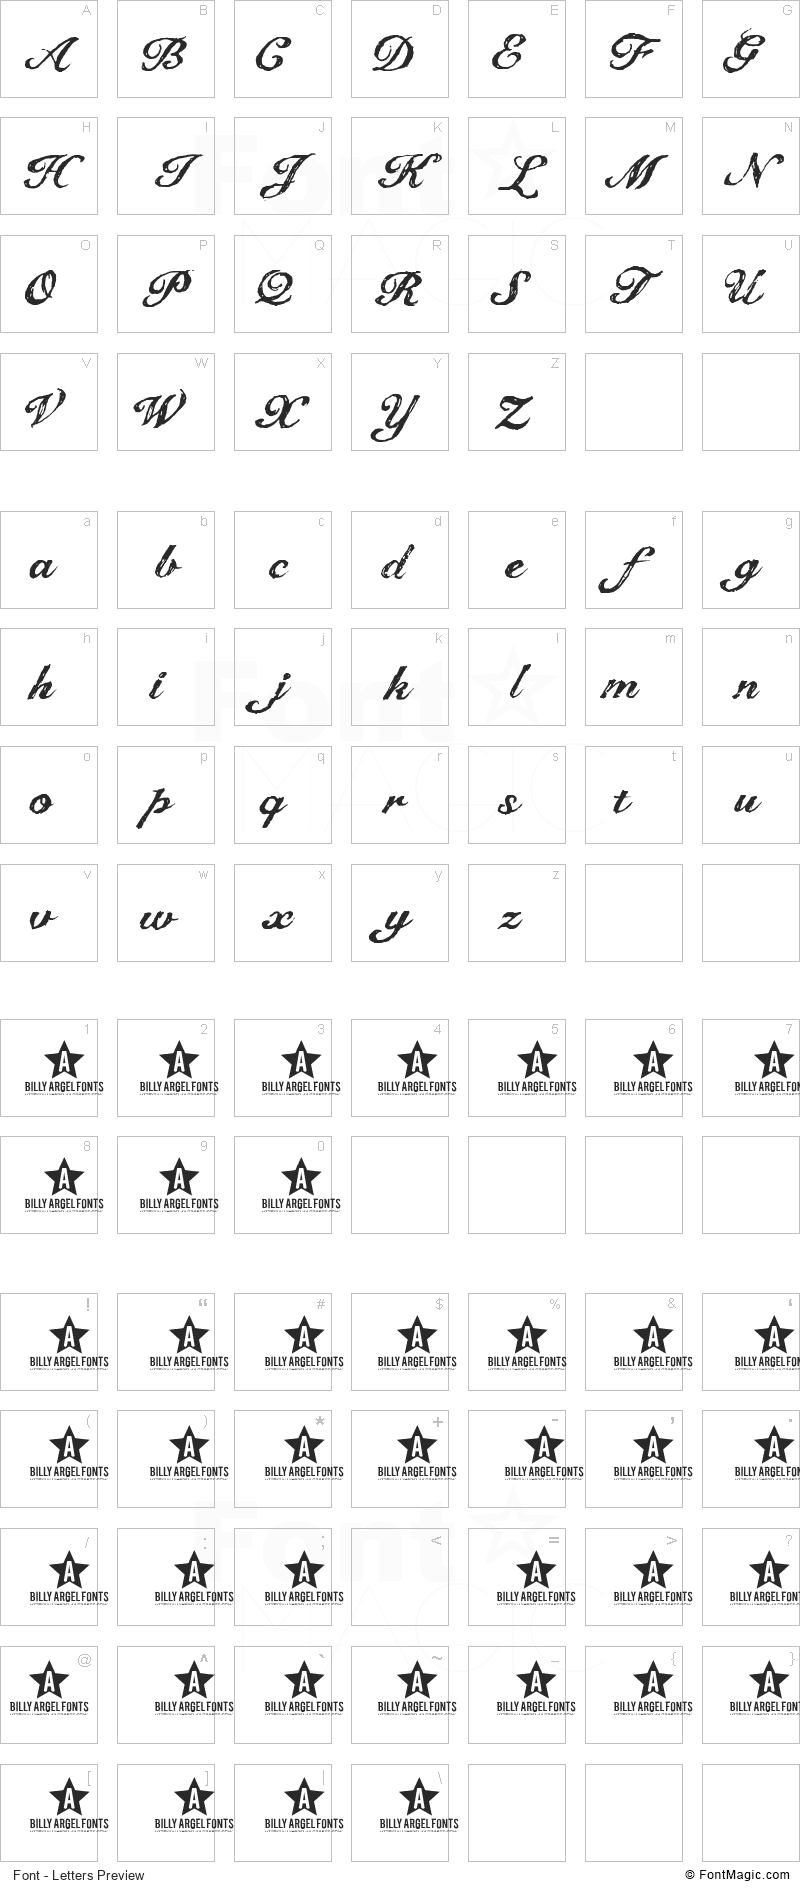 The Dreamer Font - All Latters Preview Chart